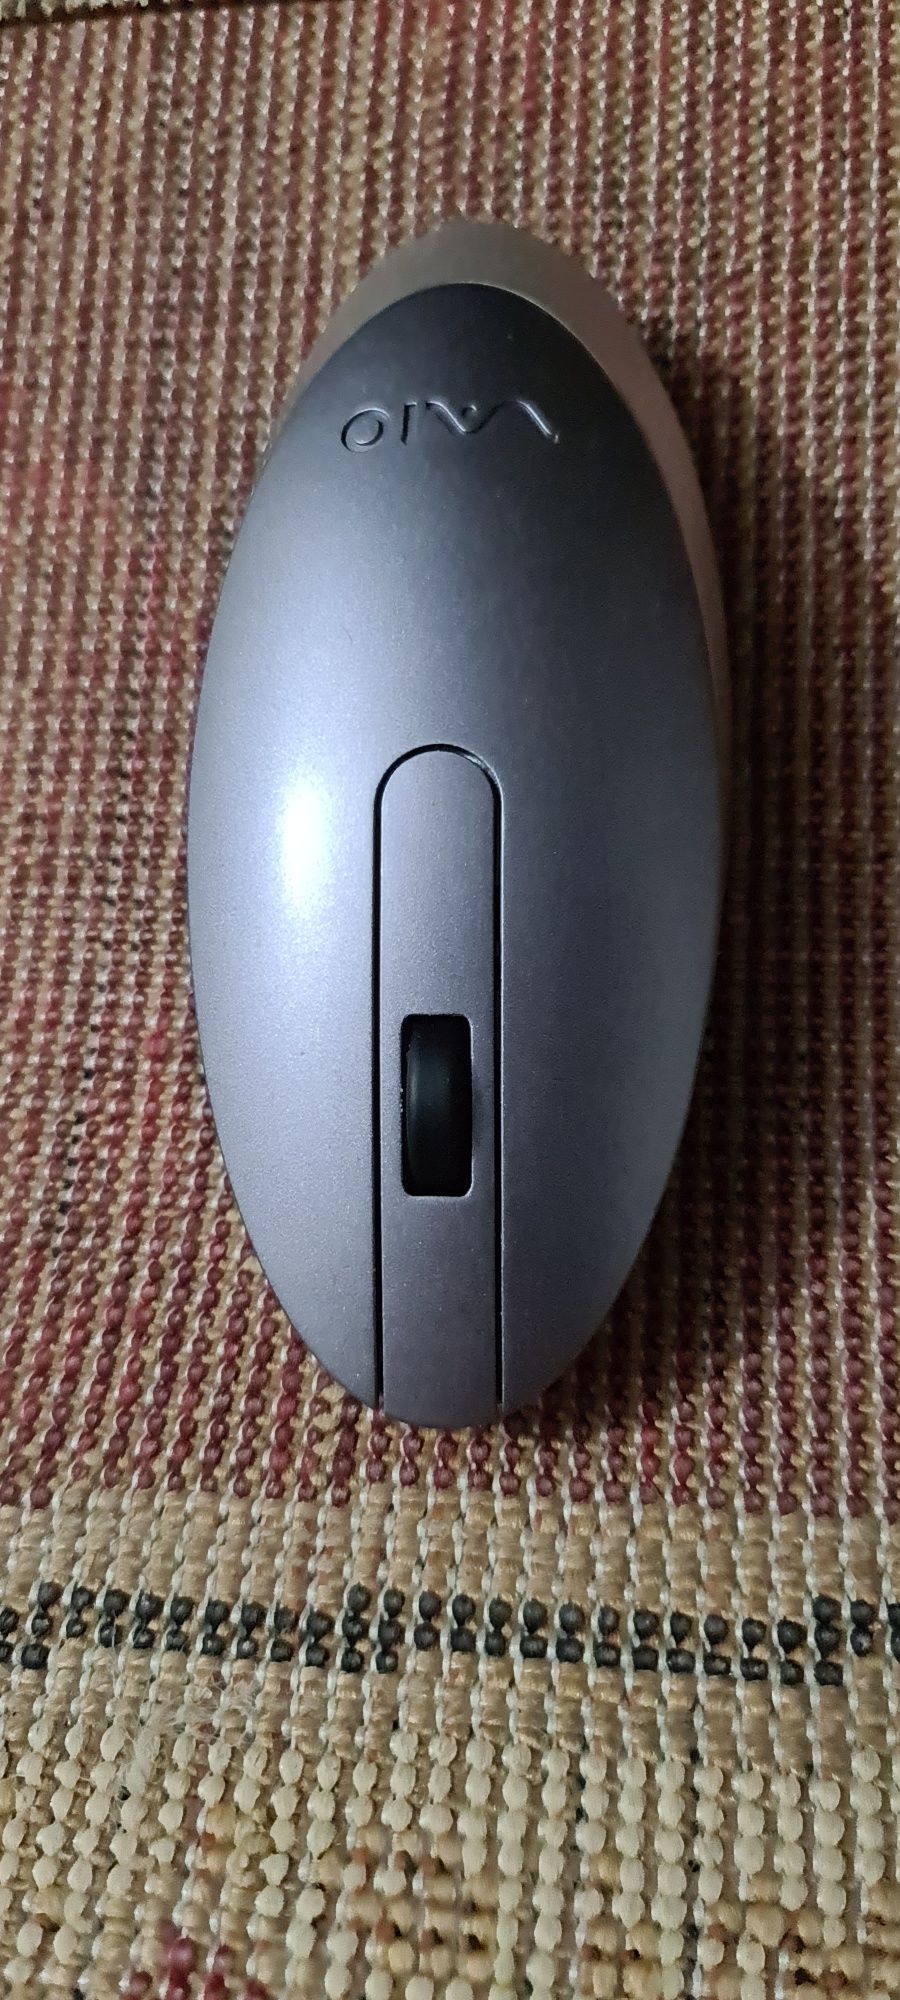 Sony Vaio Mouse Laser Bluetooth